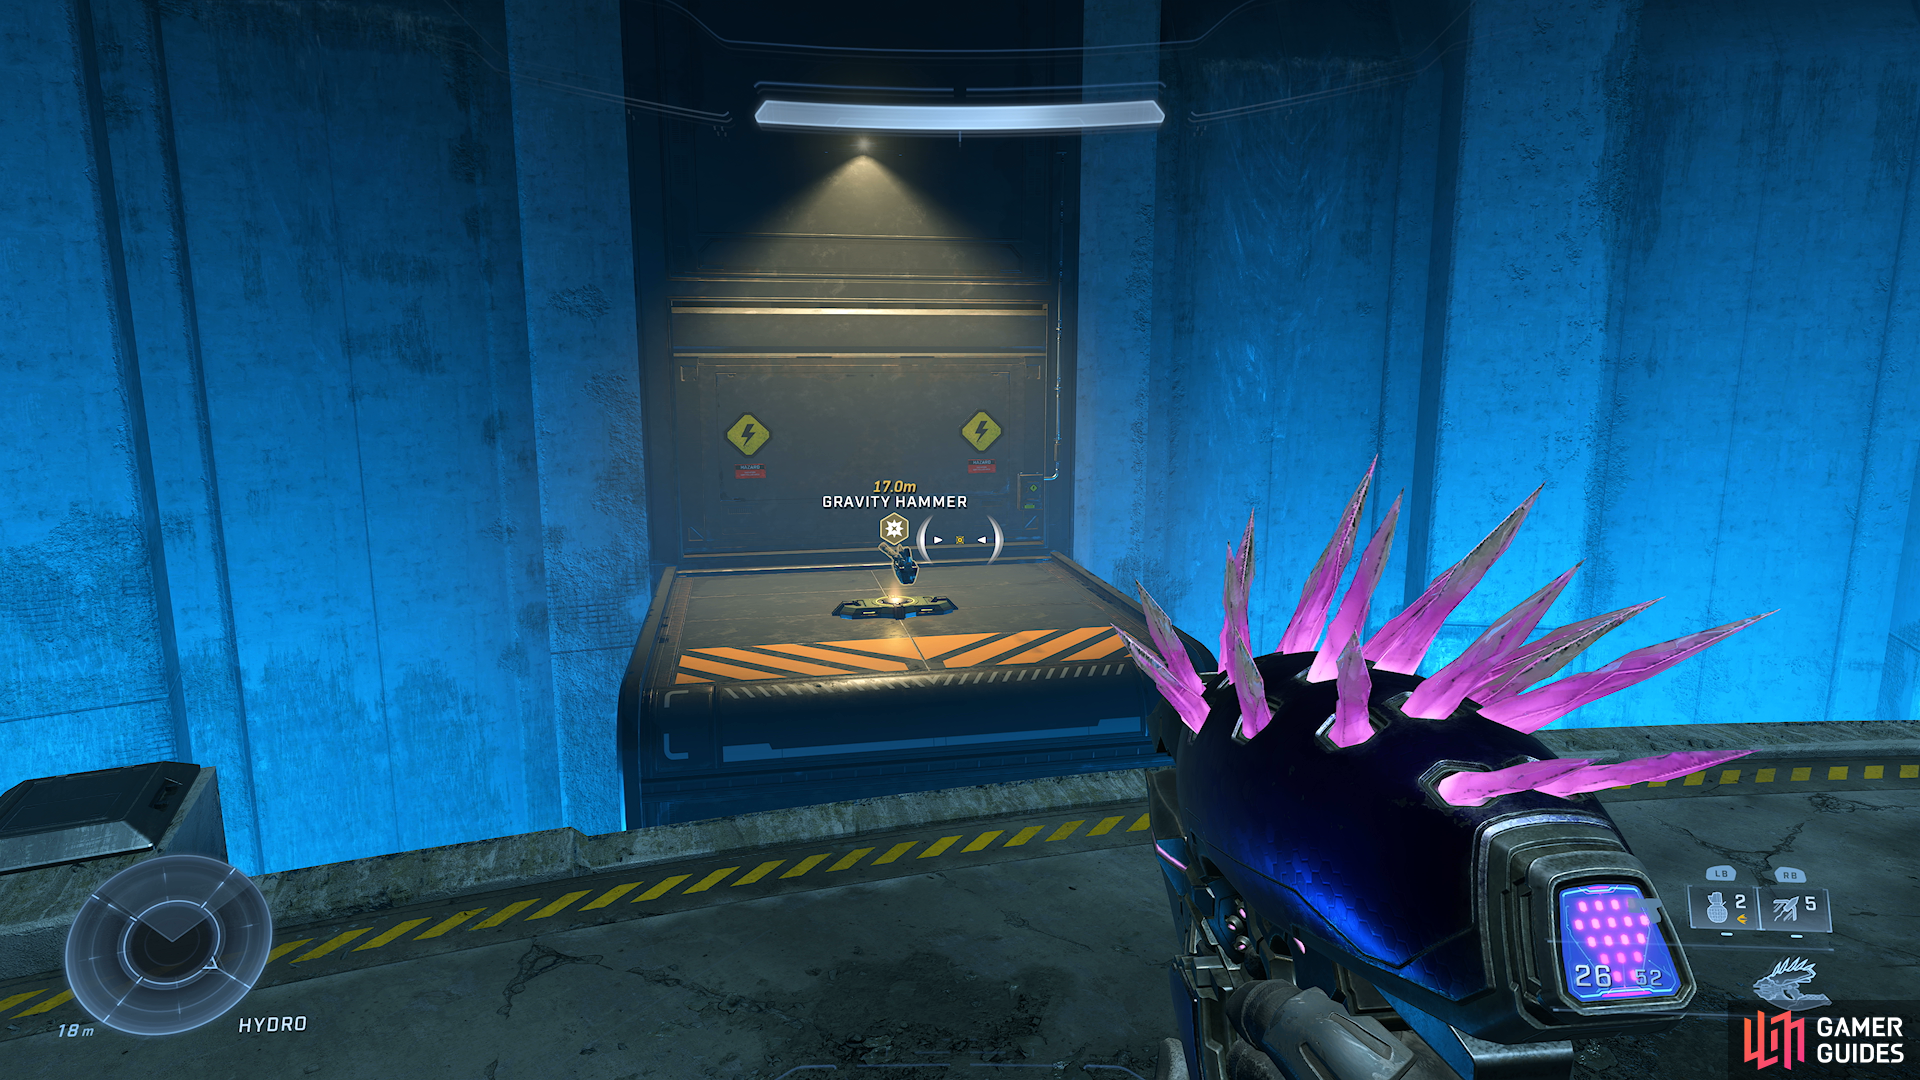 The Power Weapon can be found in the Hydro Room